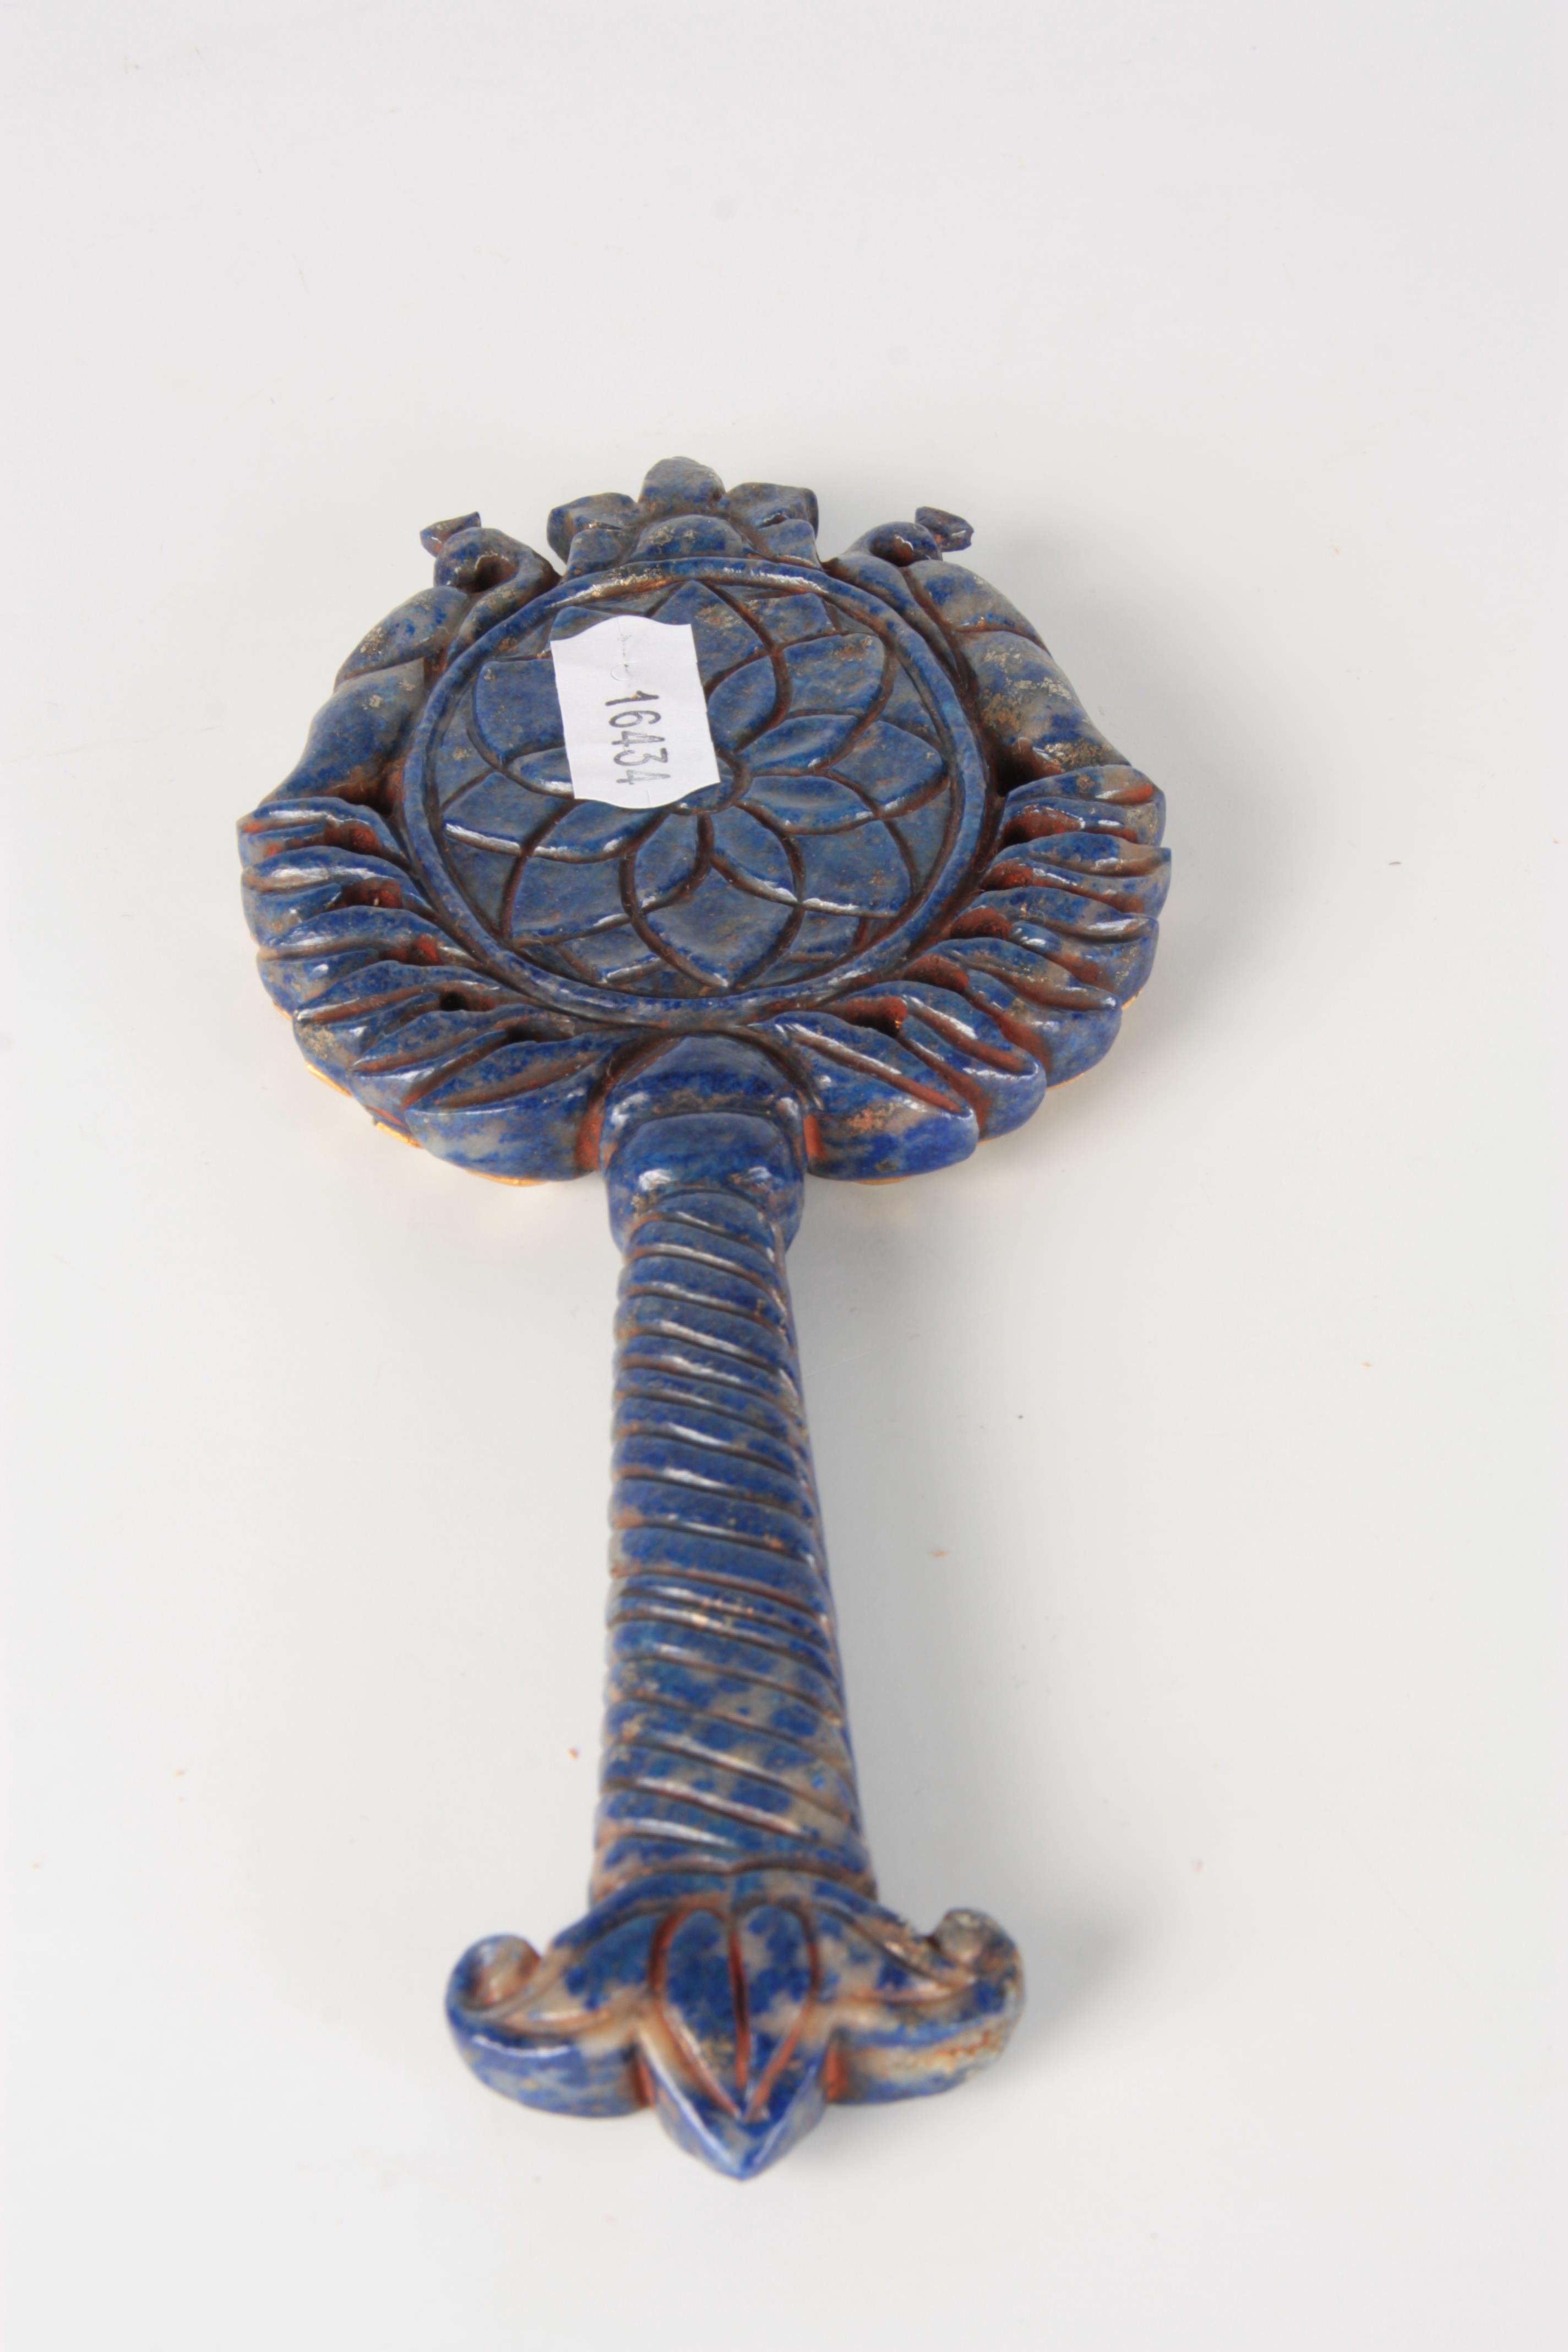 AN 20TH CENTURY LAPIS LAZULI AND DIAMOND SET CARVED HAND MIRROR the peacock and twisted handle - Image 3 of 6